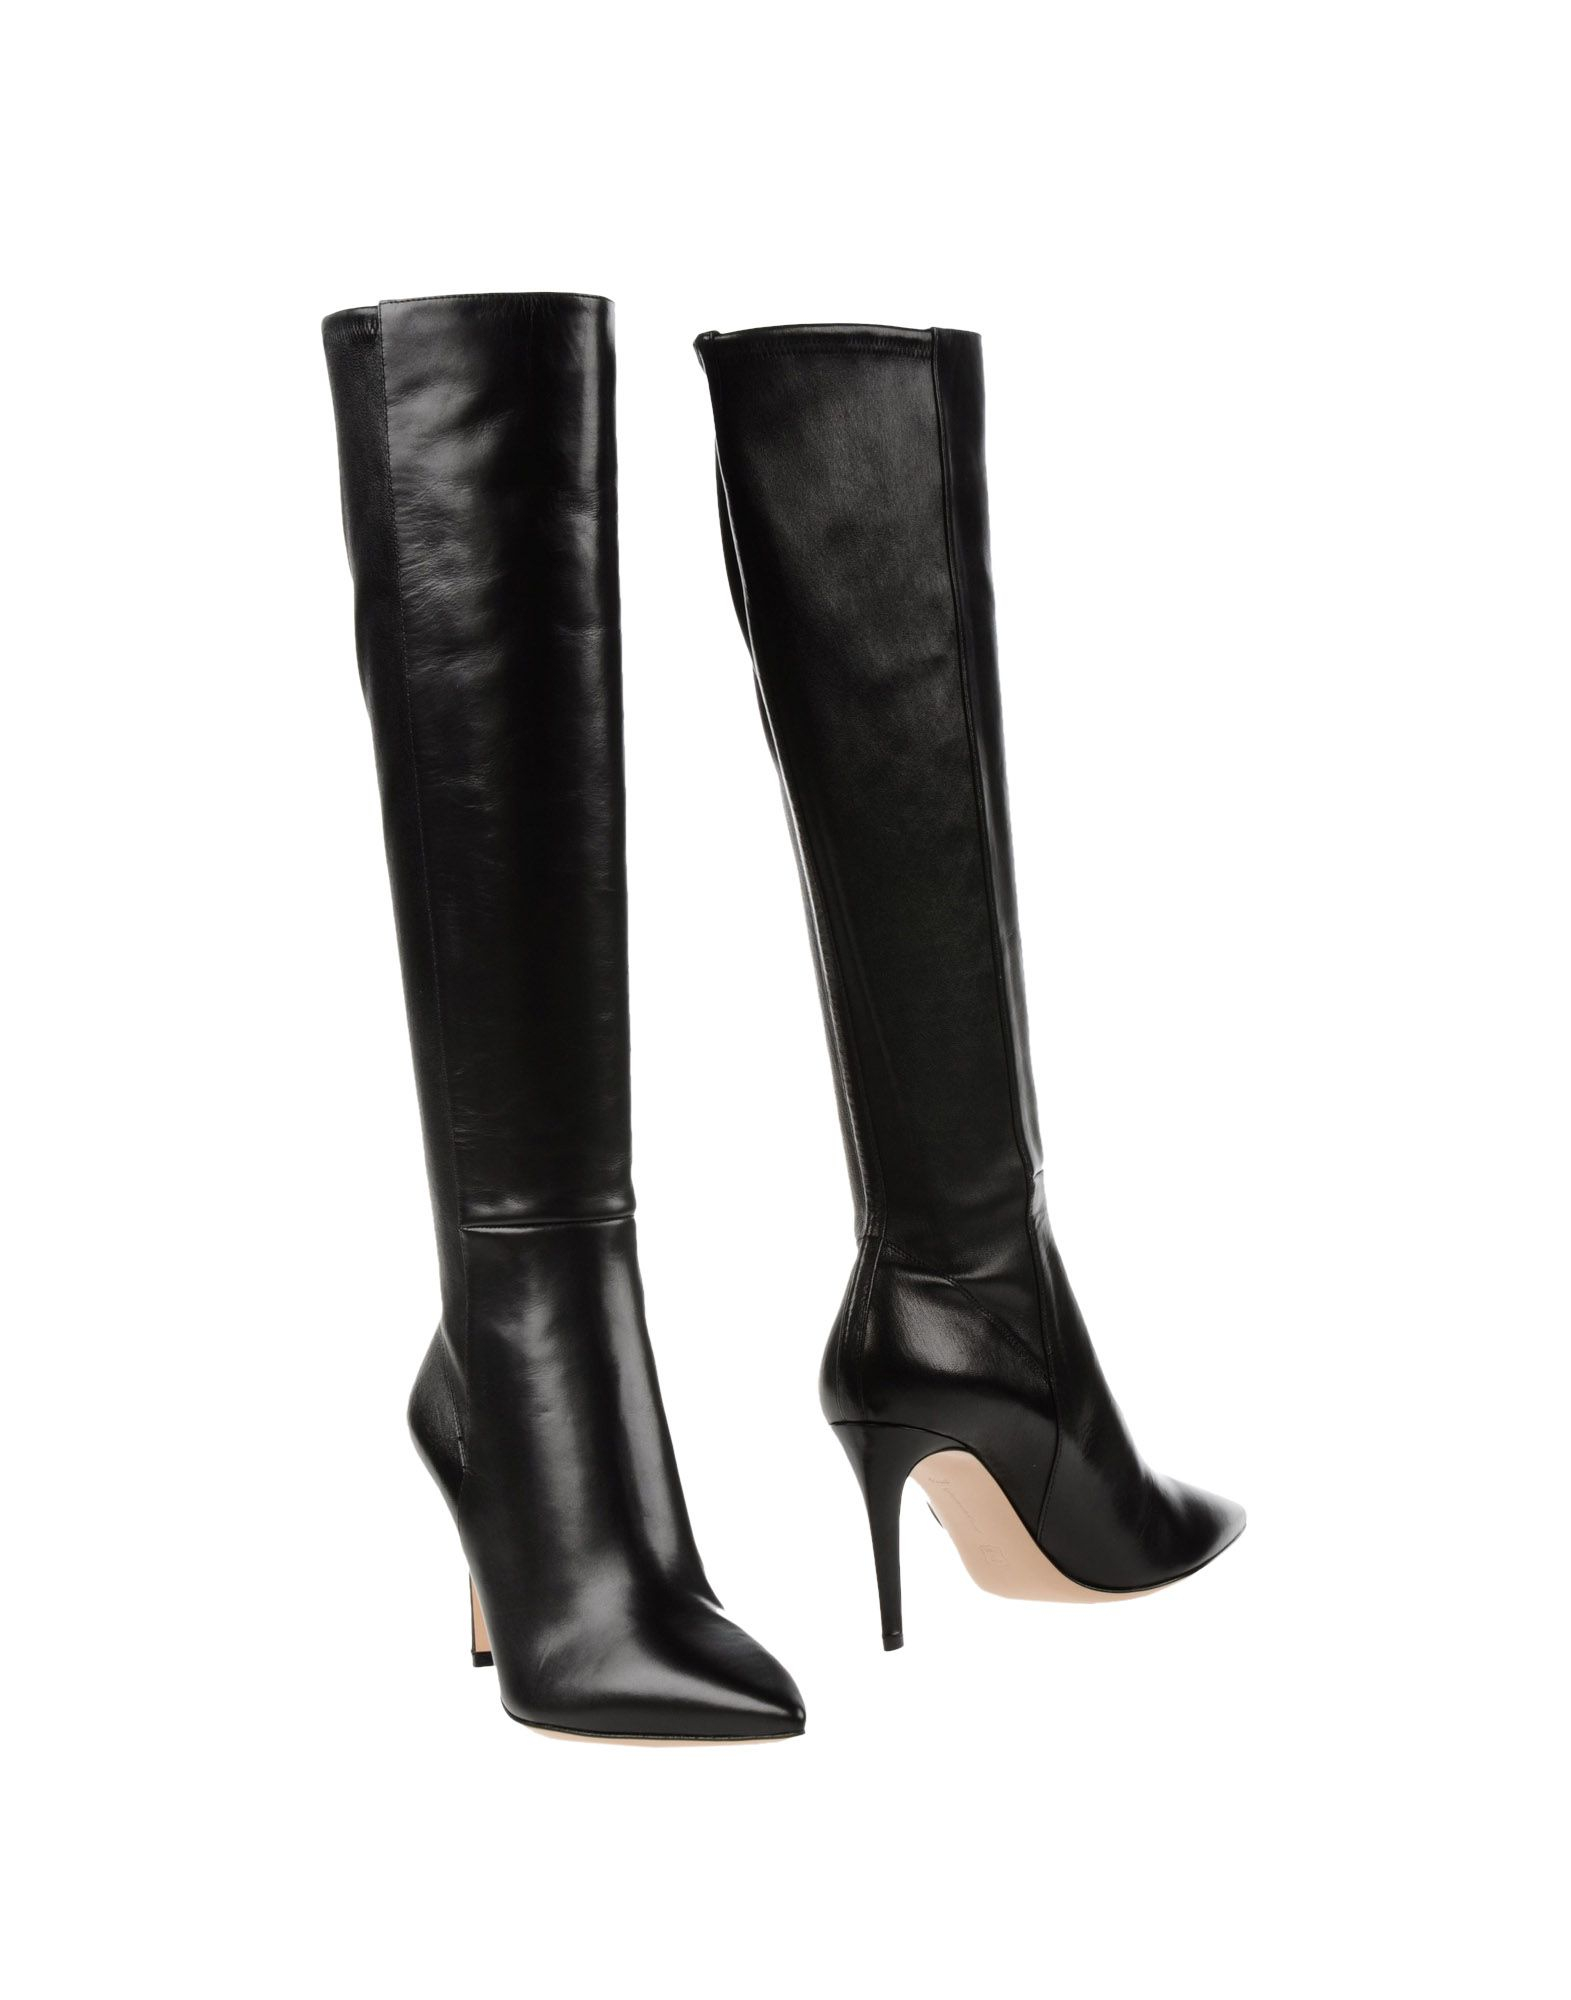 christian louboutin pointed-toe knee-high boots Black leather ...